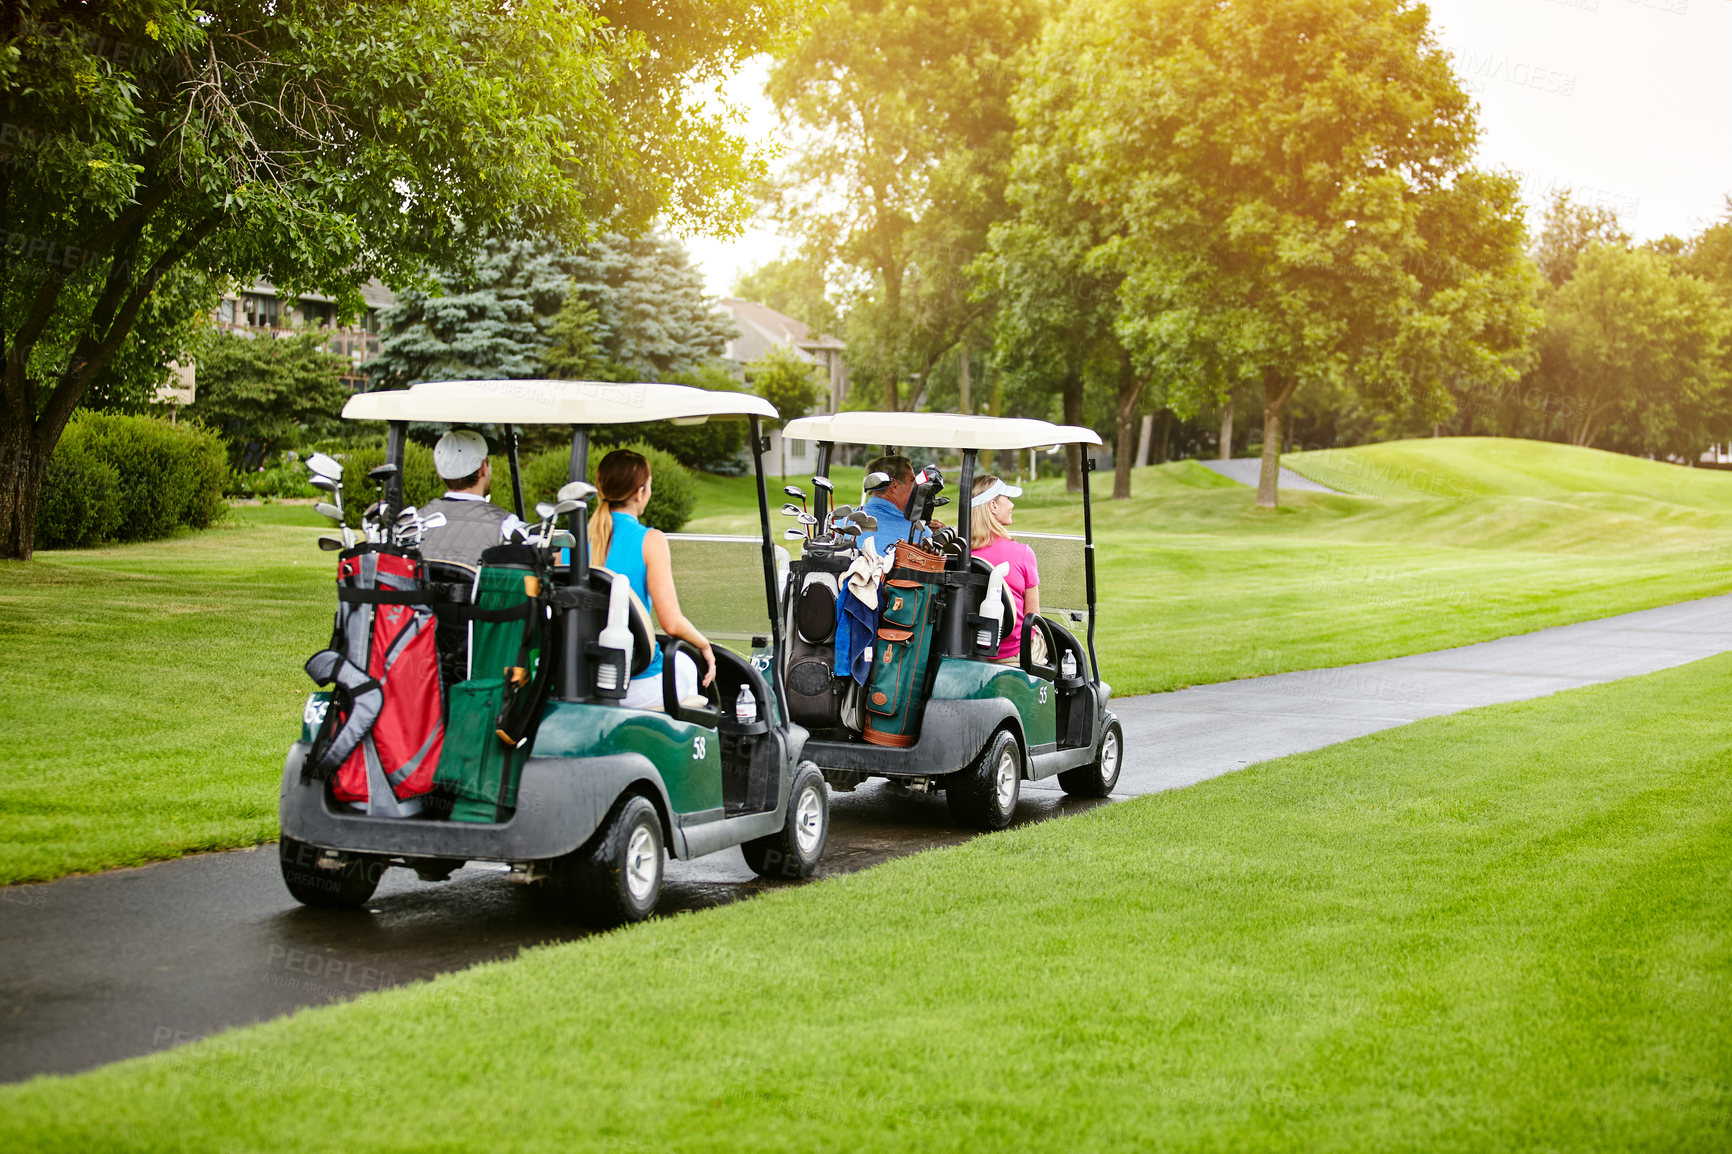 Buy stock photo Shot of four people out on a double date on a golf course